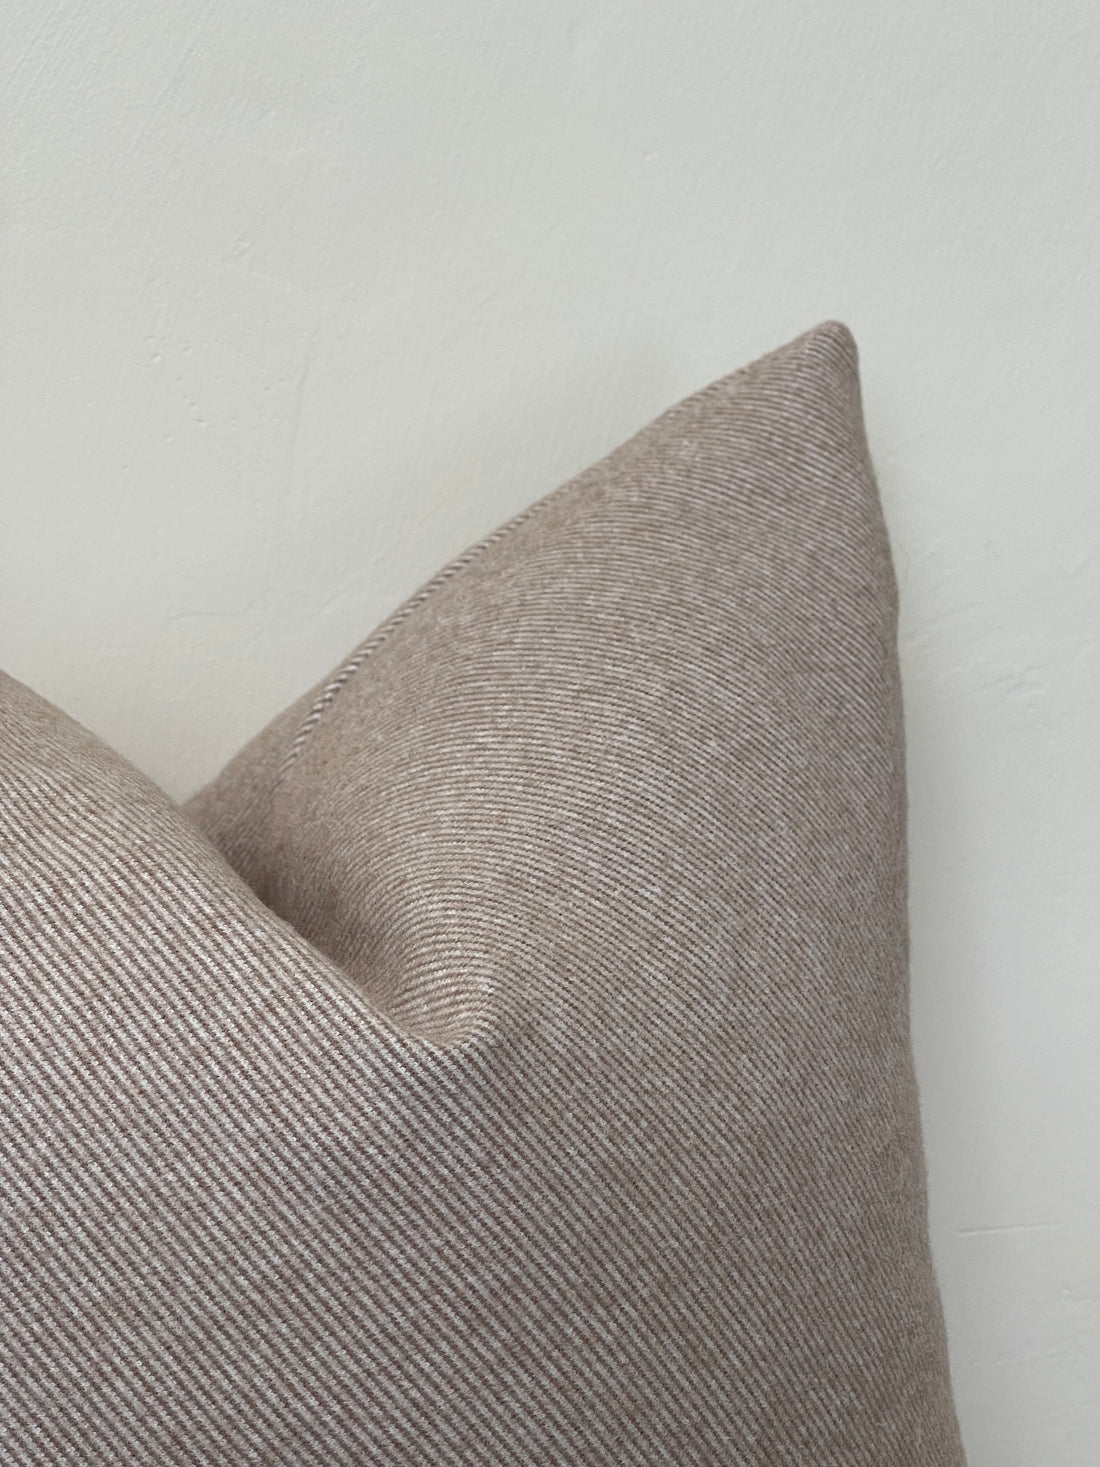 Soft beige wool-effect cushion with feather insert, blending luxury, neutral tones, and timeless aesthetic for elegant home decor.